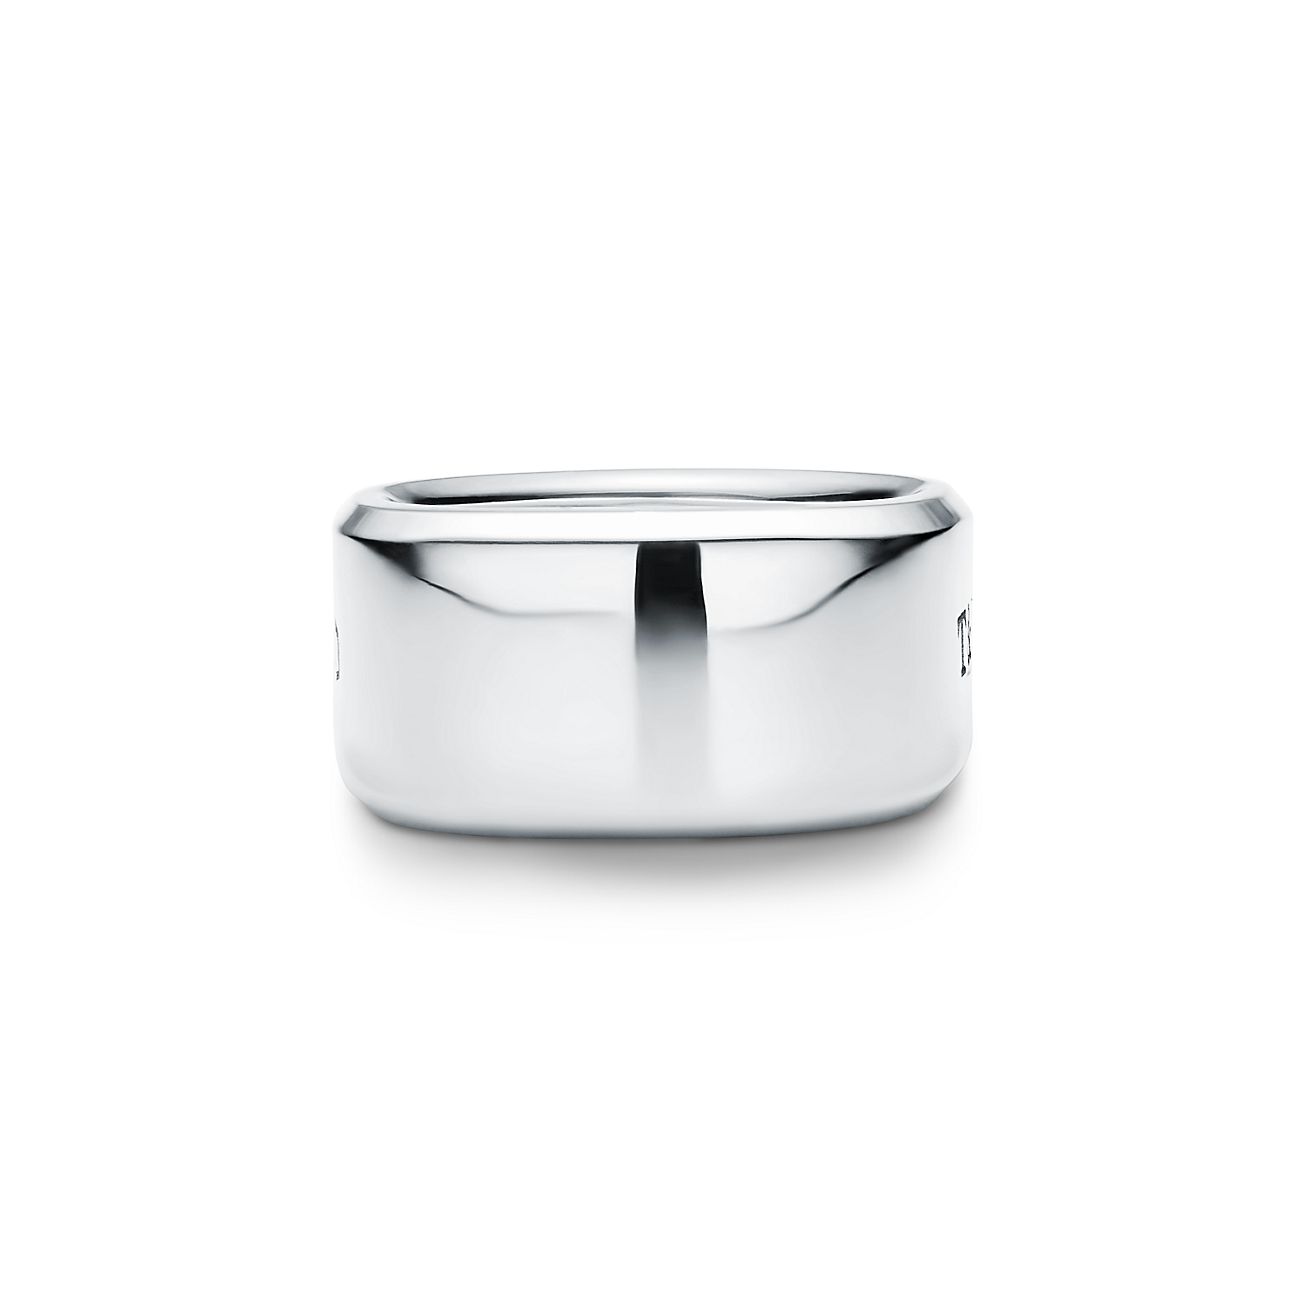 Tiffany 1837™ Makers signet ring in sterling silver, 12 mm wide.